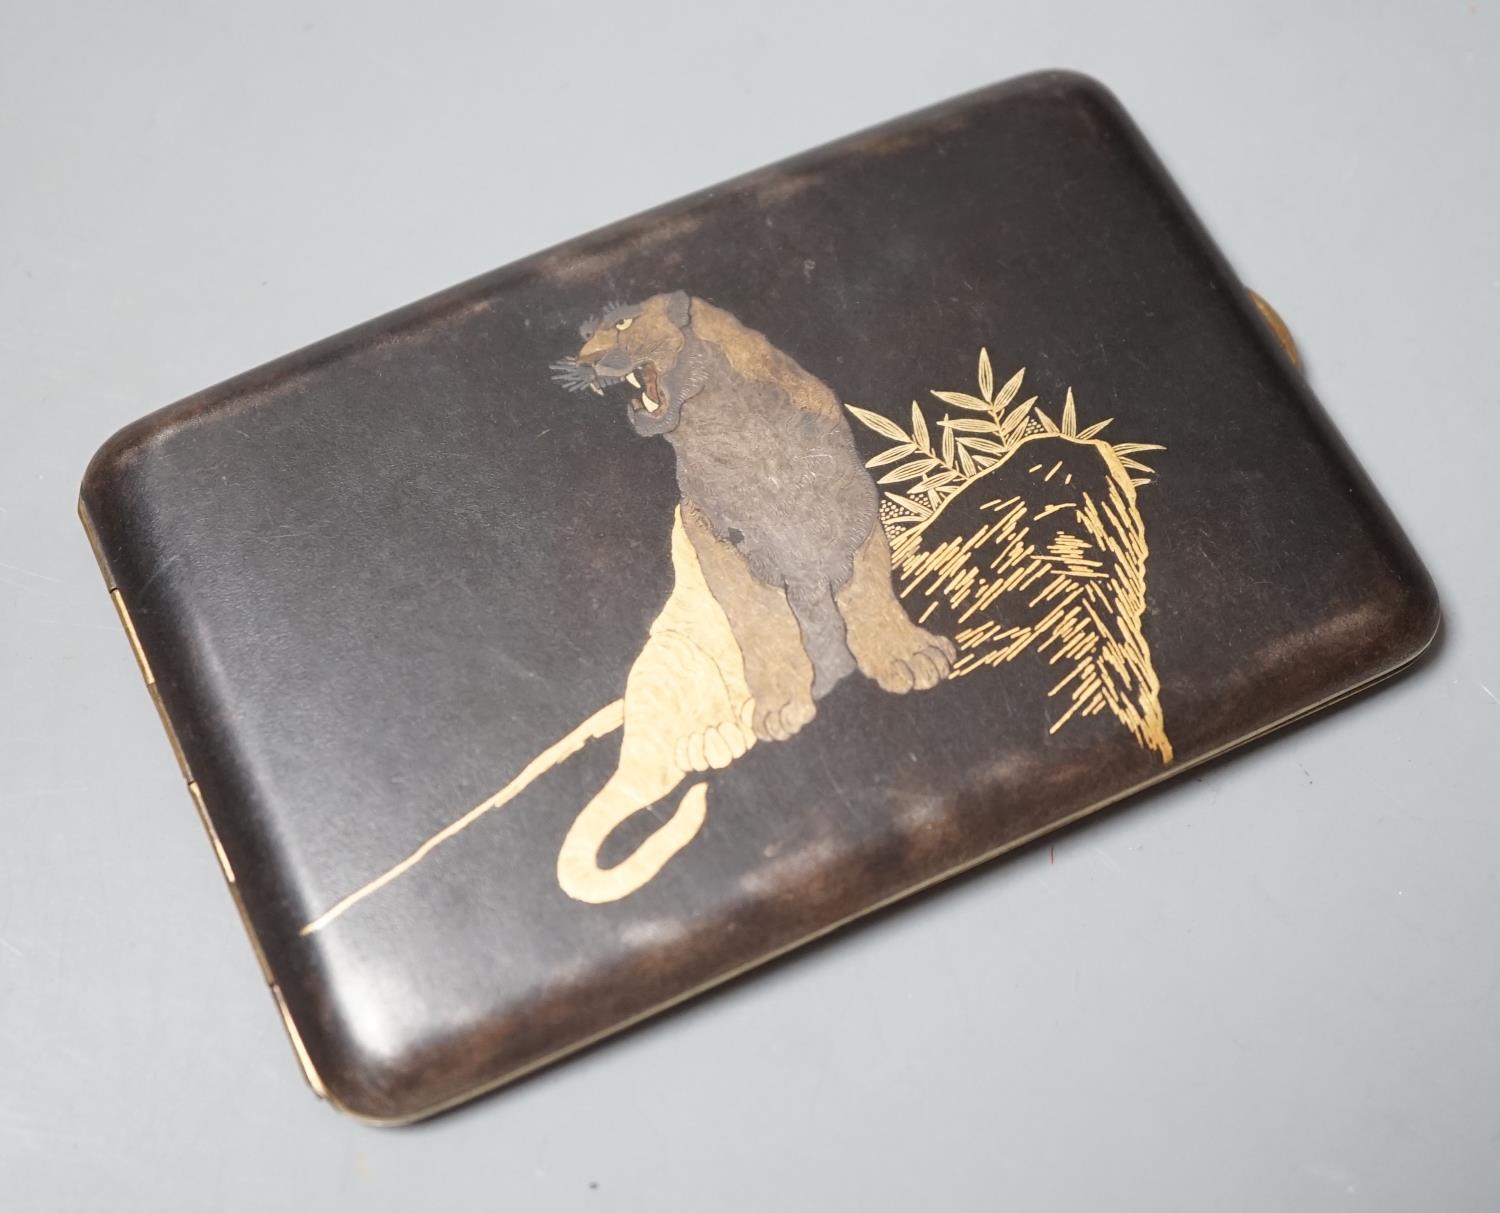 An early 20th century Japanese damascened iron cigarette case by Abe Shoten, 8x12cm